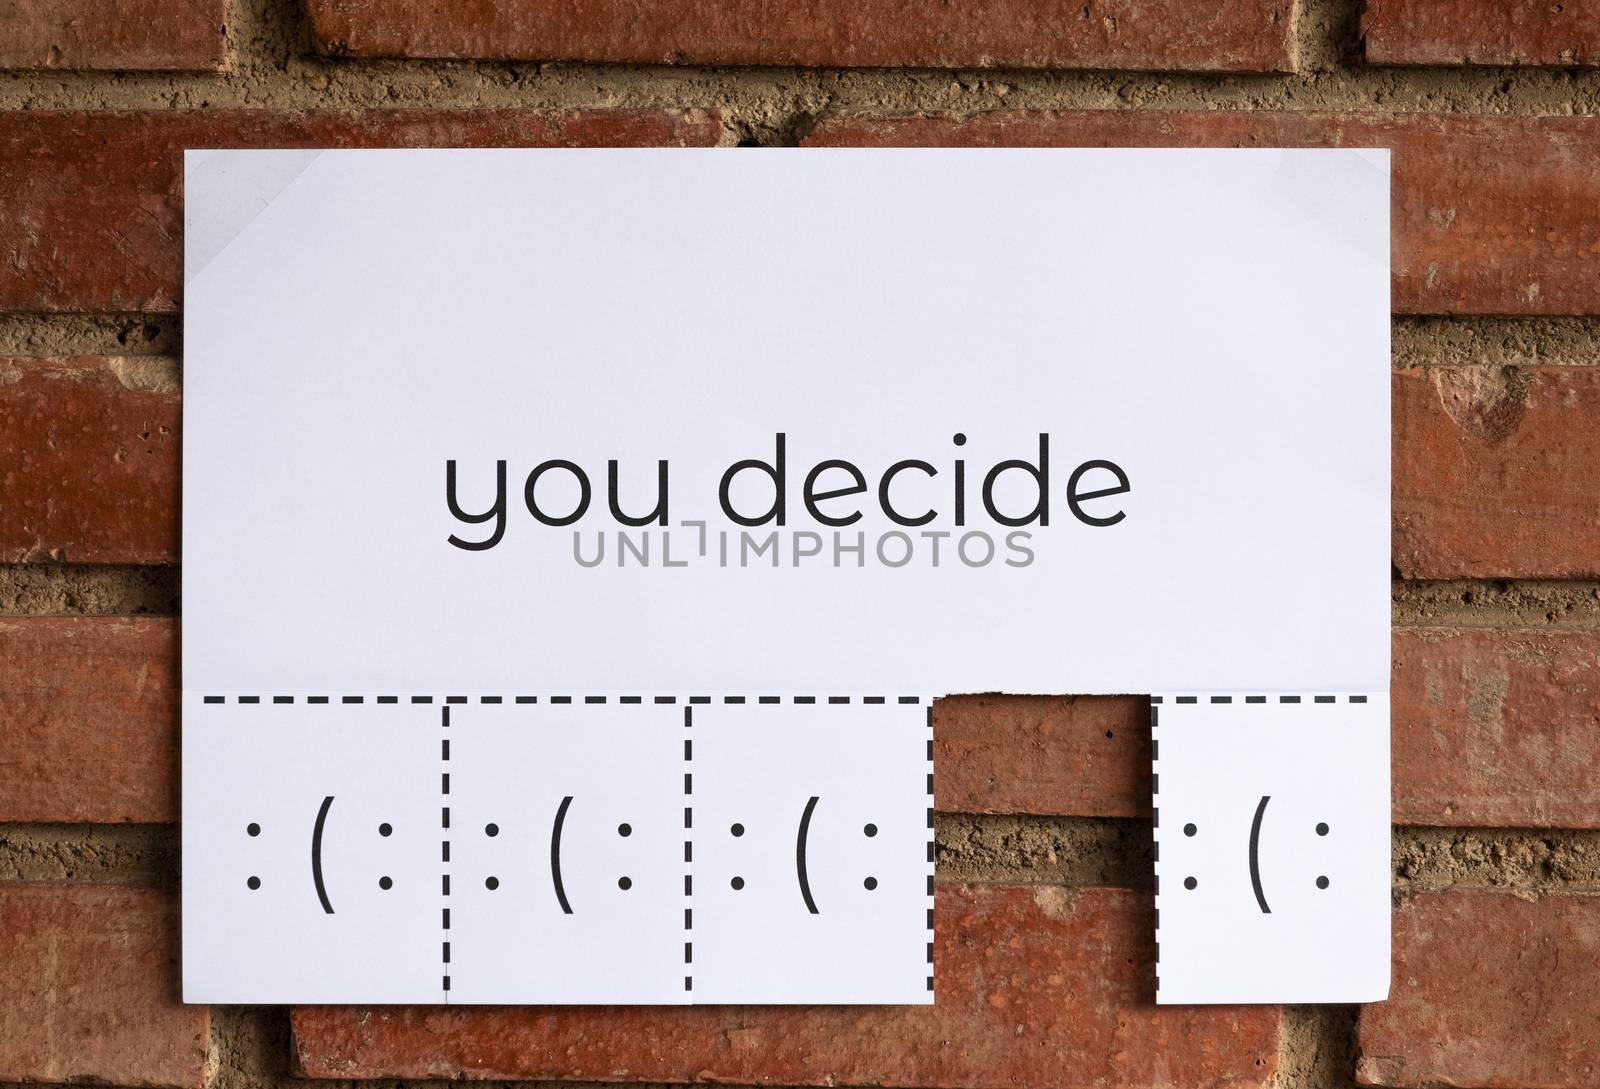 A paper with the phrase "You Decide" writen on it with different pieces with smile faces to tear off and decide what do you want to be, sad or happy. Smiling is free. The image is from the front.